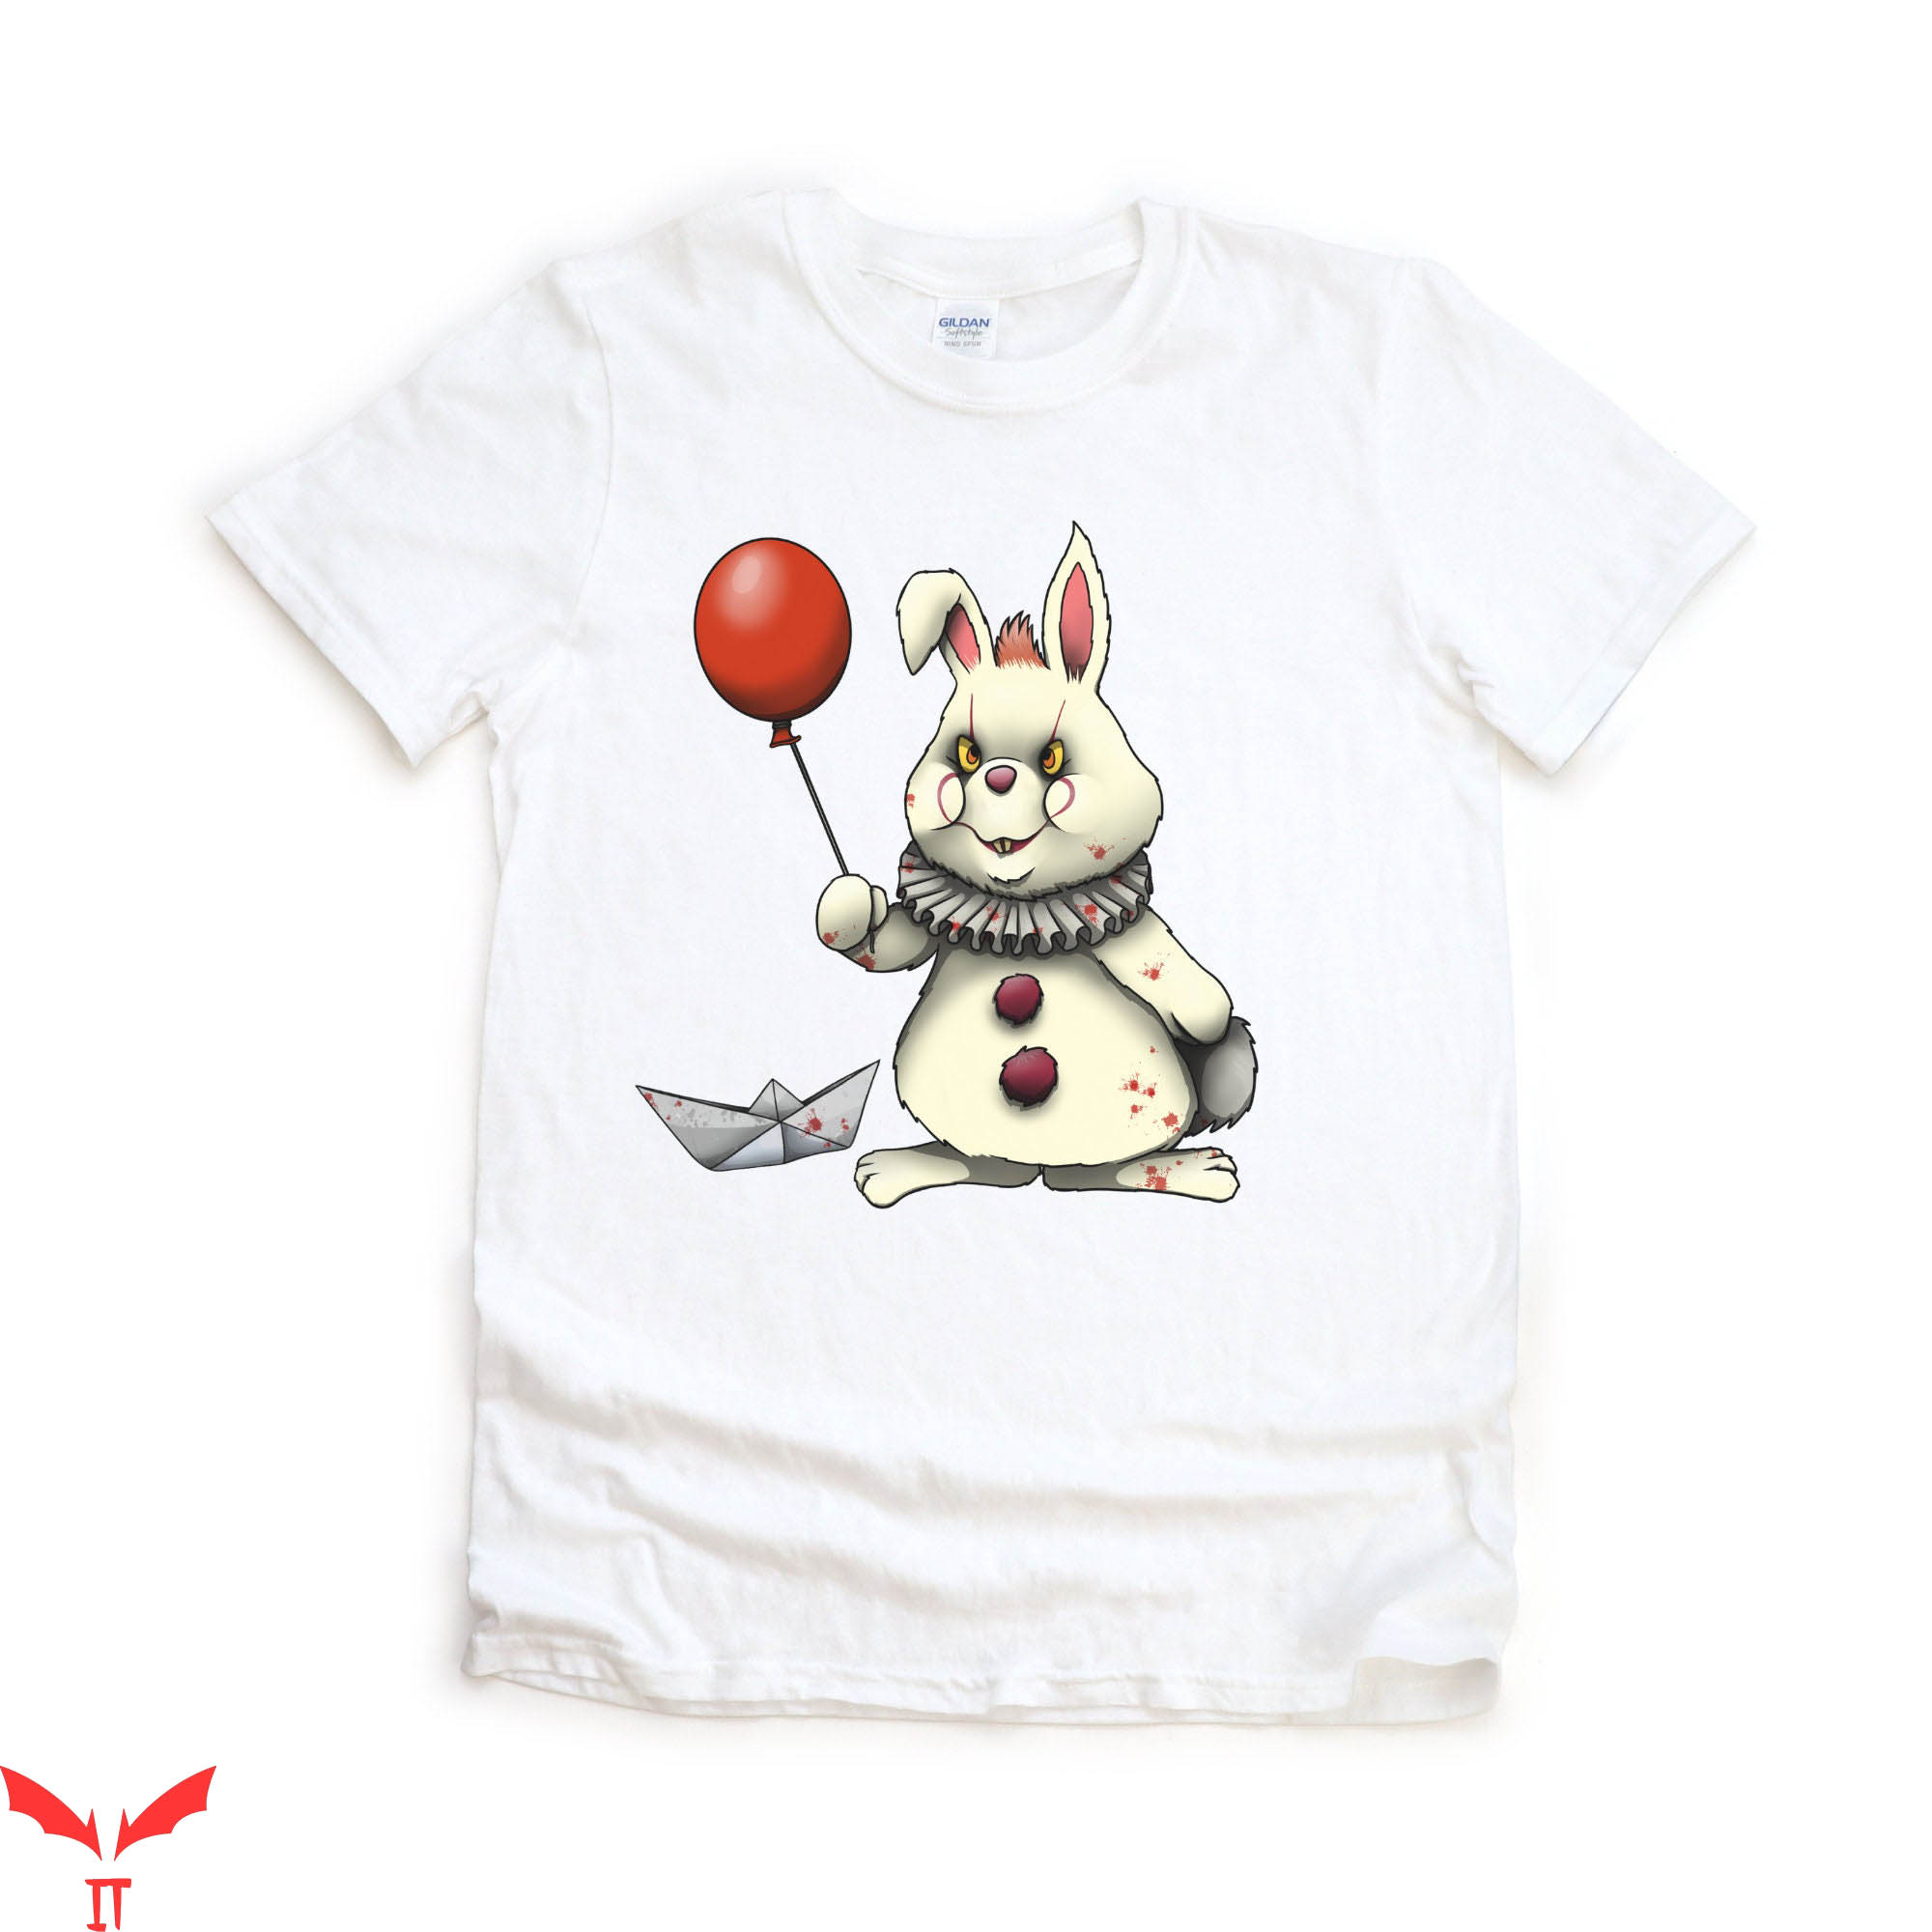 IT Pennywise T-Shirt Killer Bunny Clown With Red Balloon